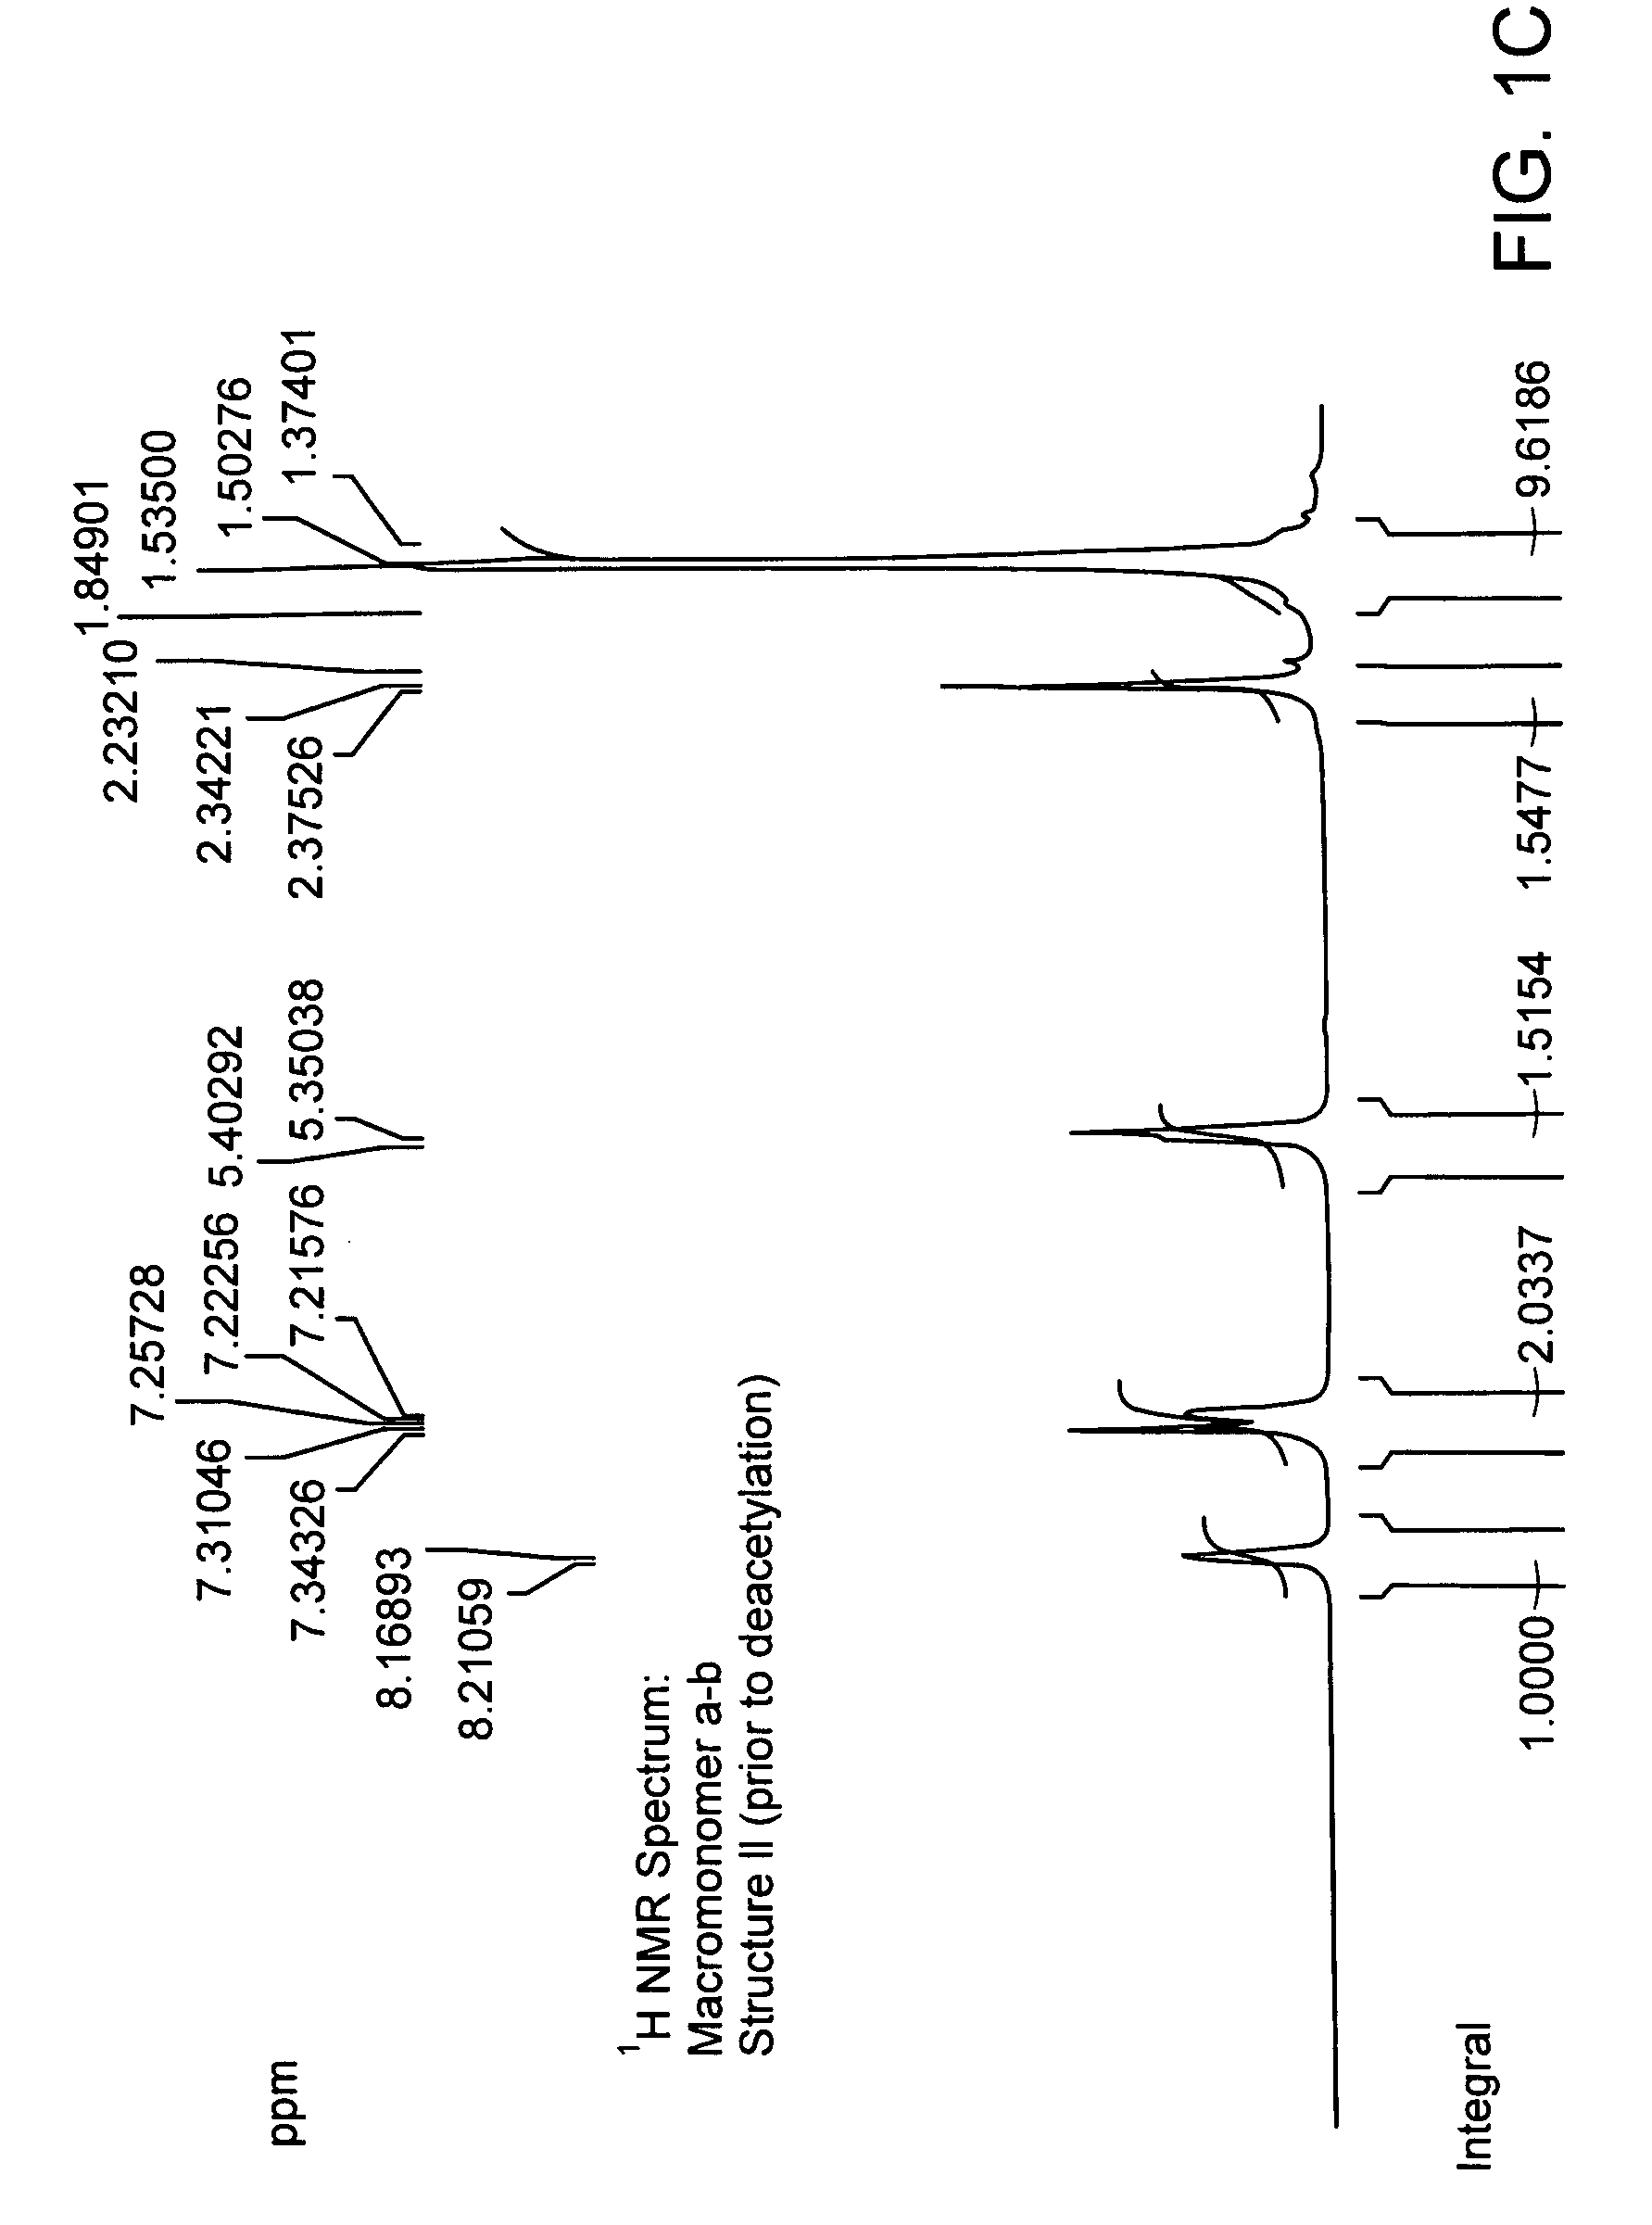 Anti-oxidant macromonomers and polymers and methods of making and using the same